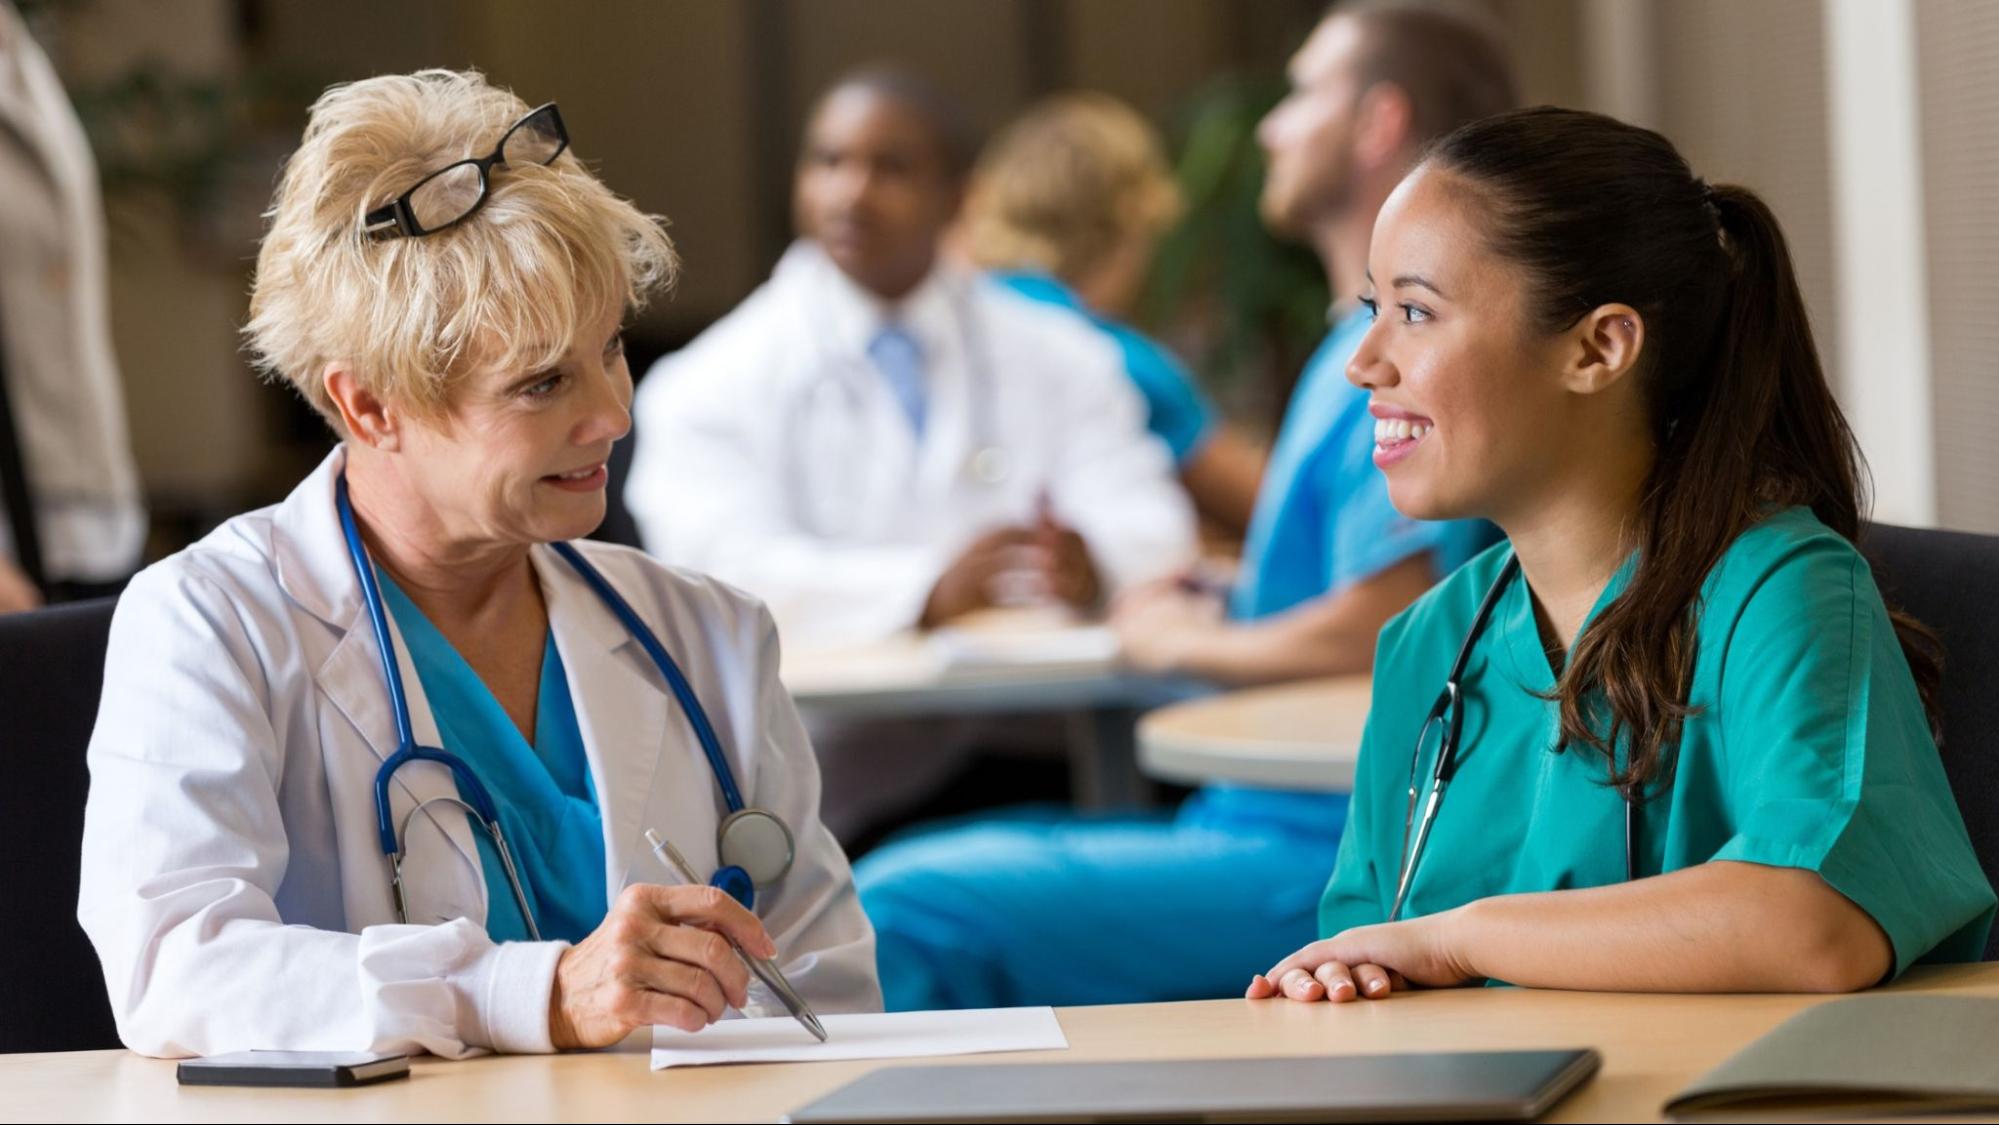 The Importance of Continuing Education for Nurses